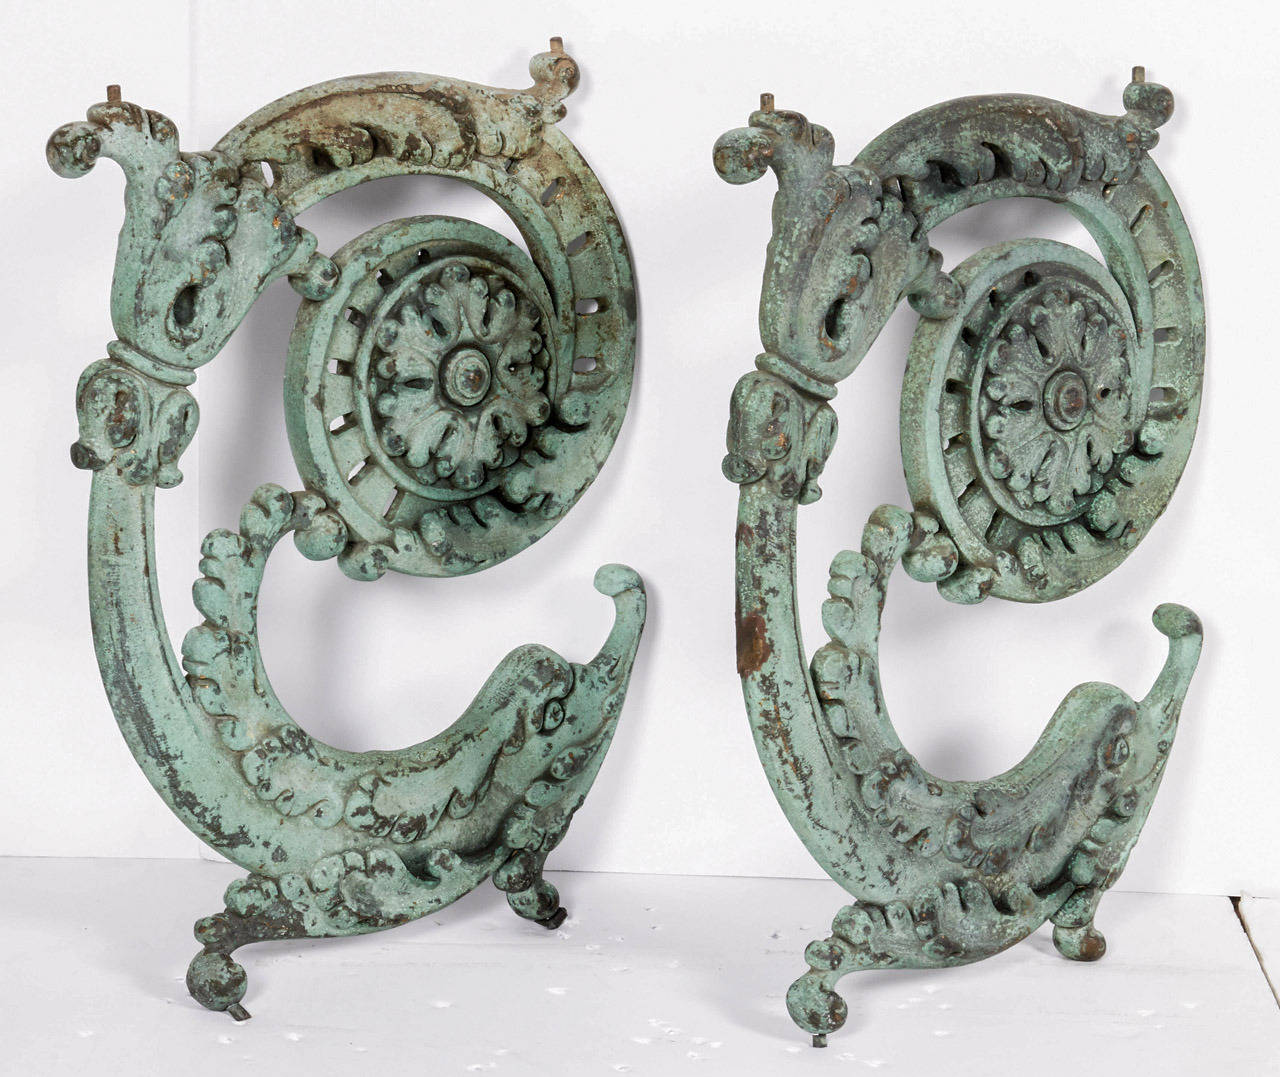 Nicely patinated pair of circa 1900 Beaux Arts style Bronze C scroll balustrade sections having nicely modeled mythological dolphin figures and ornate foliate metalwork with rosette motifs.